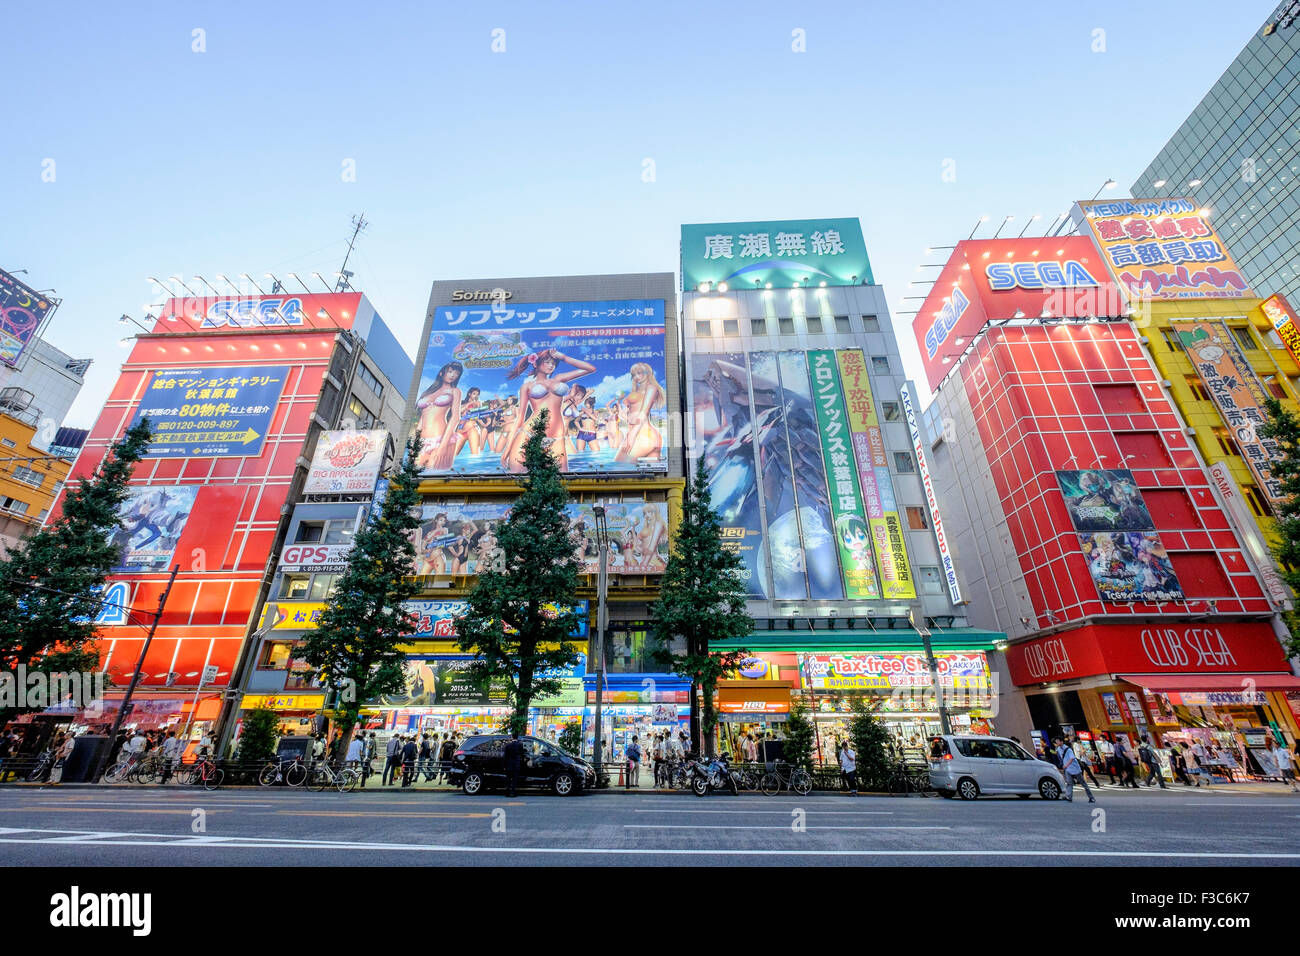 Billboards in Akihabara known as Electric Town or Geek Town selling Manga based games and videos in Tokyo Japan Stock Photo